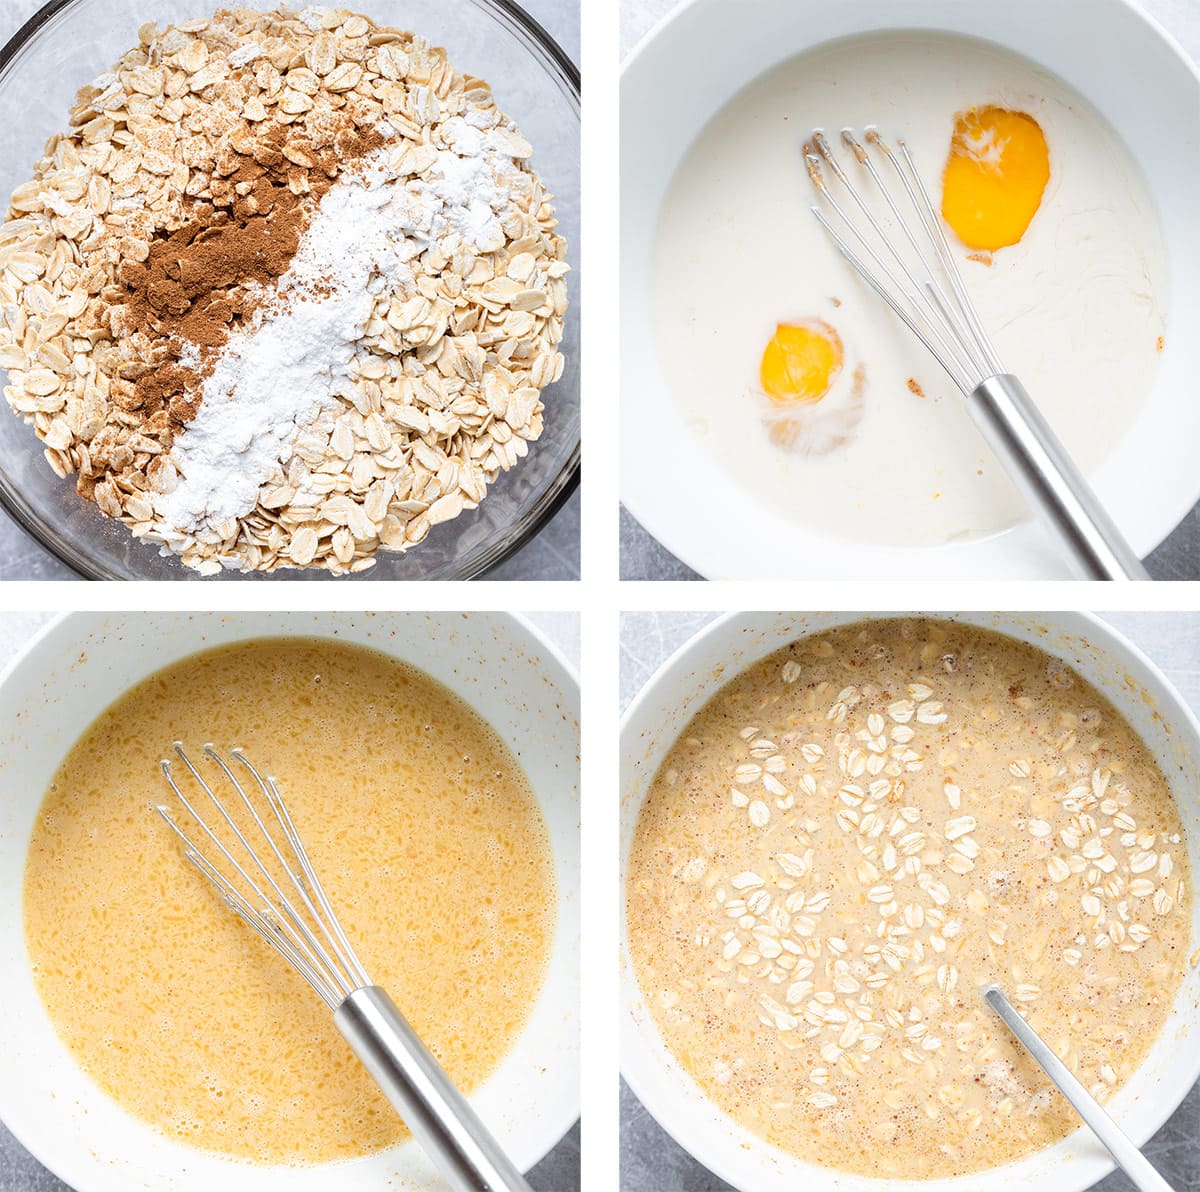 Four steps showing how to make baked oatmeal batter from mixing dry and wet ingredients separately and then together.